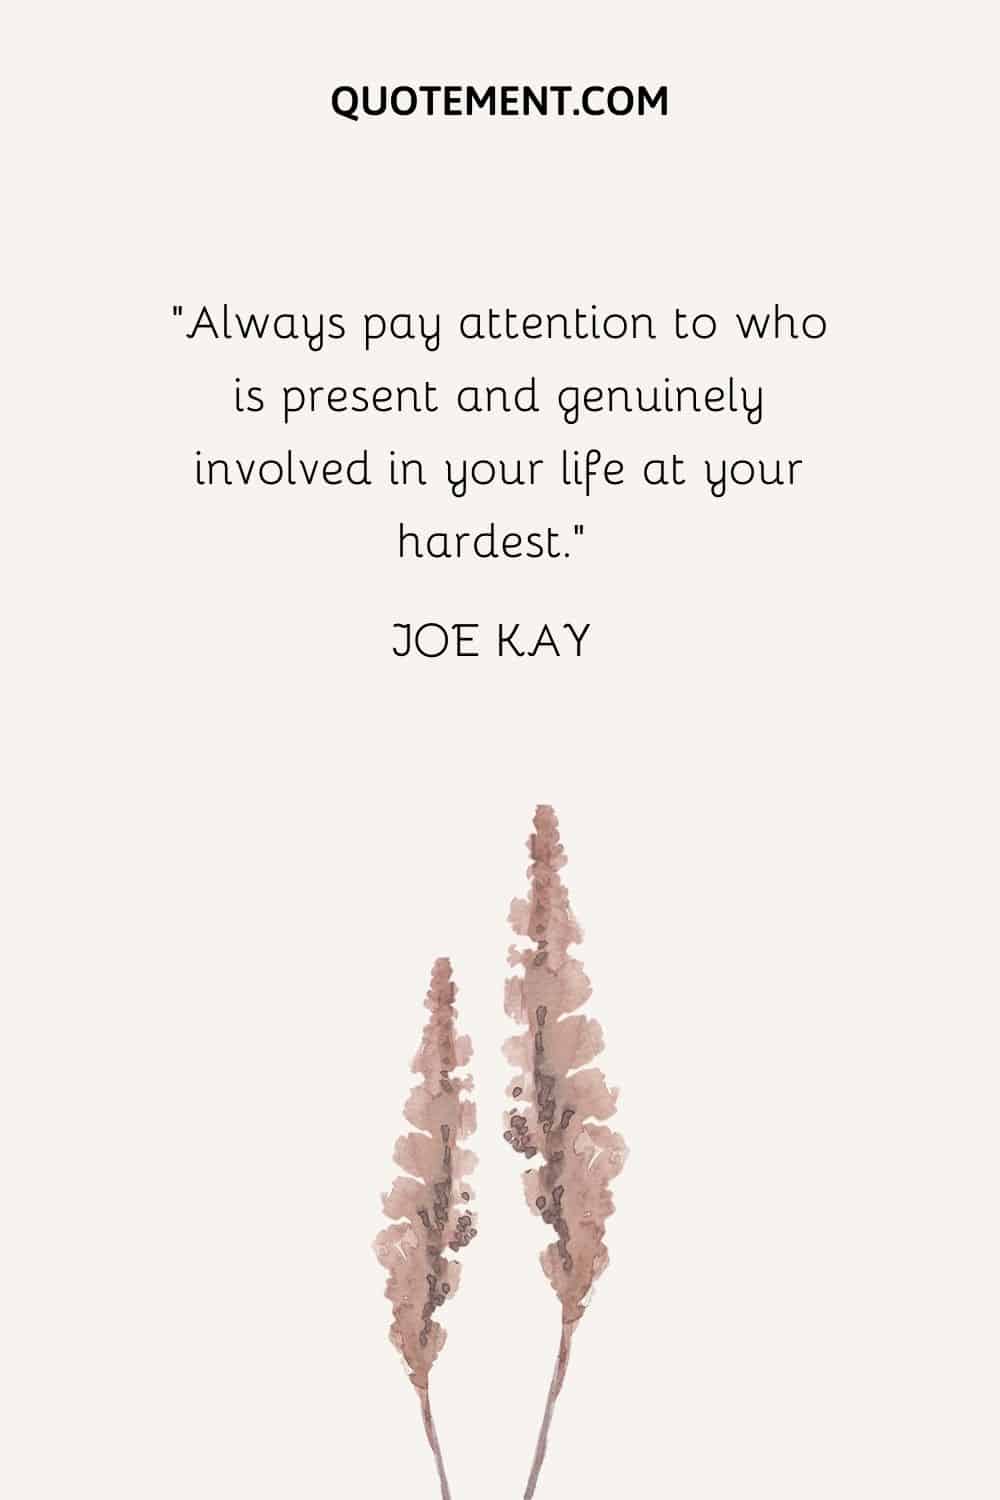 Always pay attention to who is present and genuinely involved in your life at your hardest.” — Joe Kay